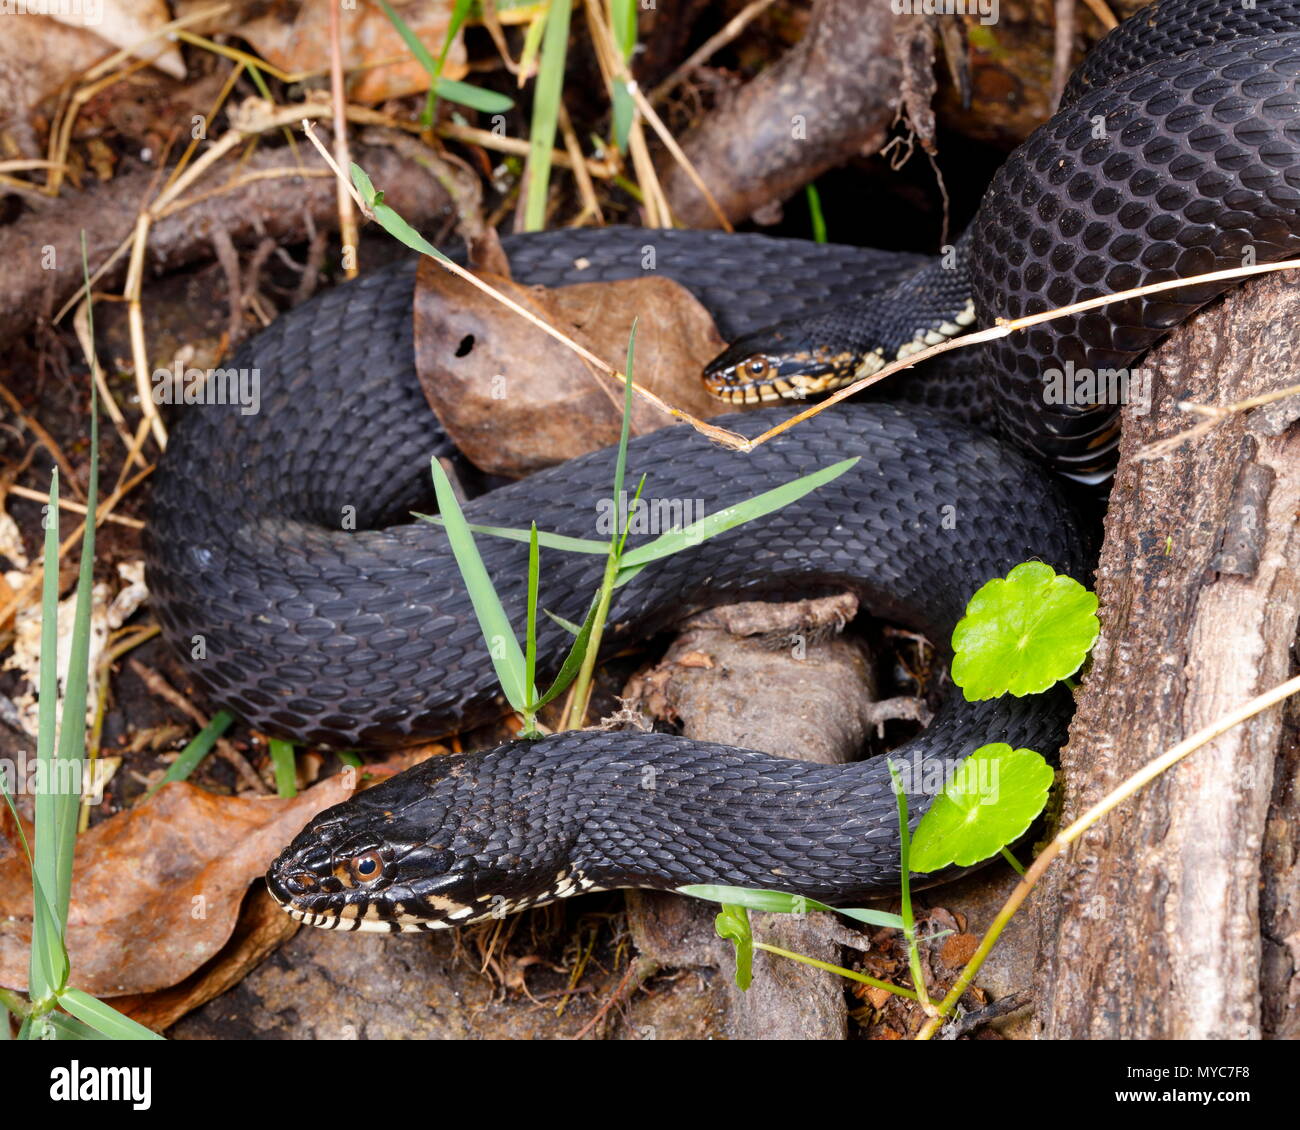 A pair of Florida banded water snakes, Nerodia fasciata pictiventris, courting. Stock Photo